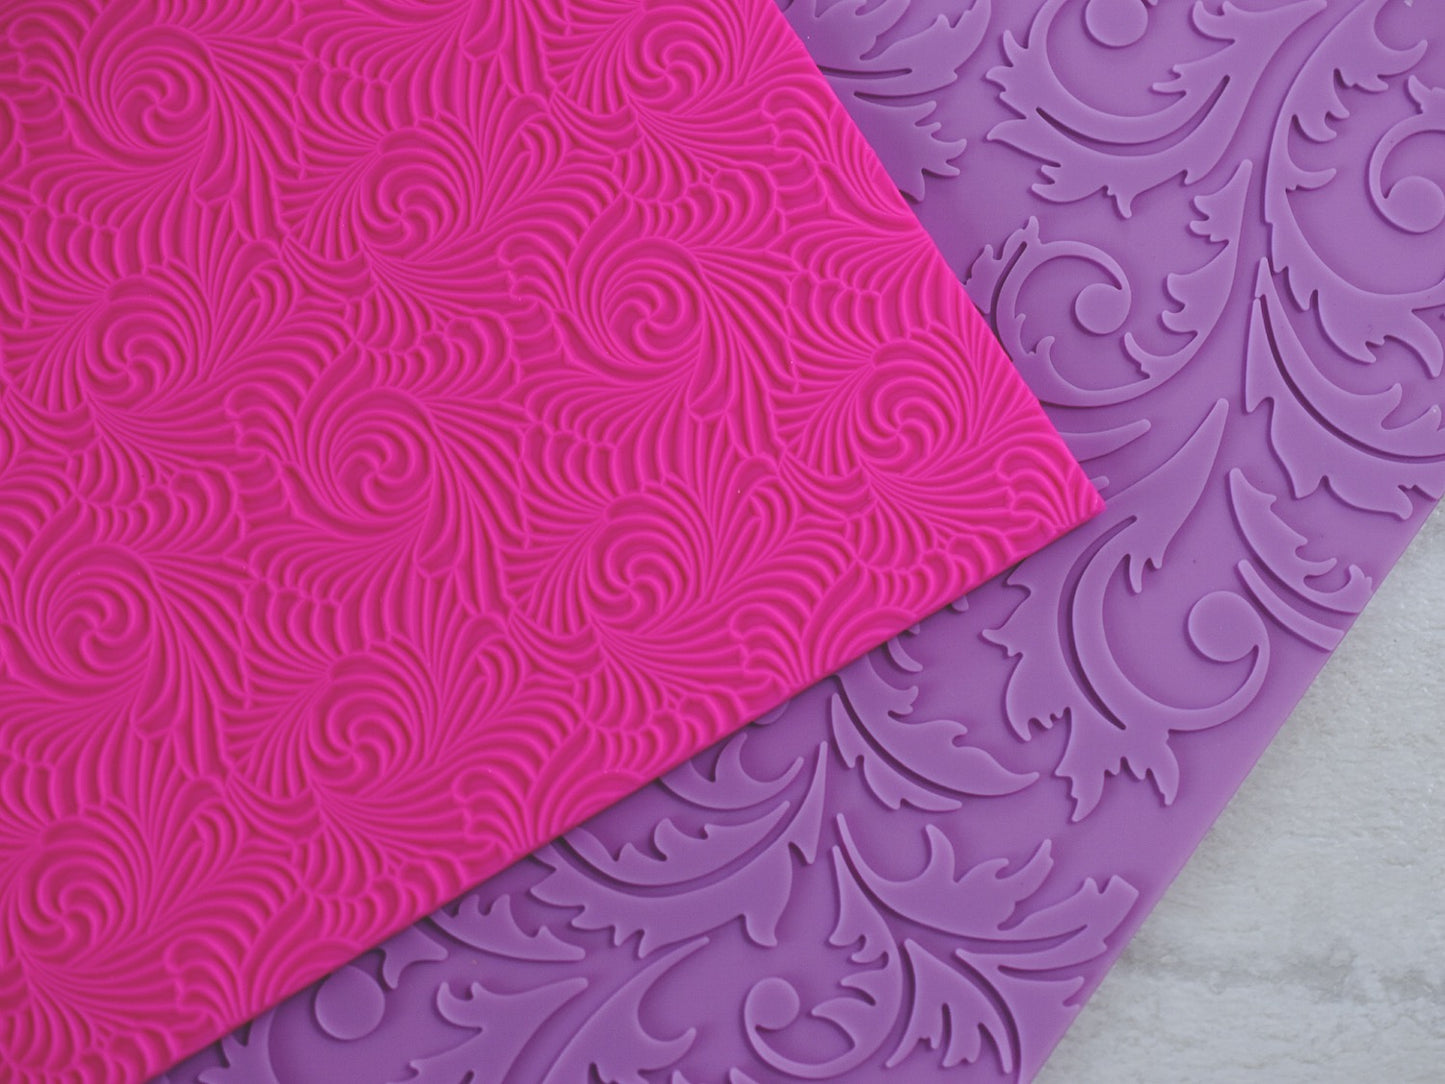 A close up view a textured pink mat with swirls and a textured purple mat with a floral filigree design are resting on a wooden surface. The pink mat is resting on the purple mat slightly.